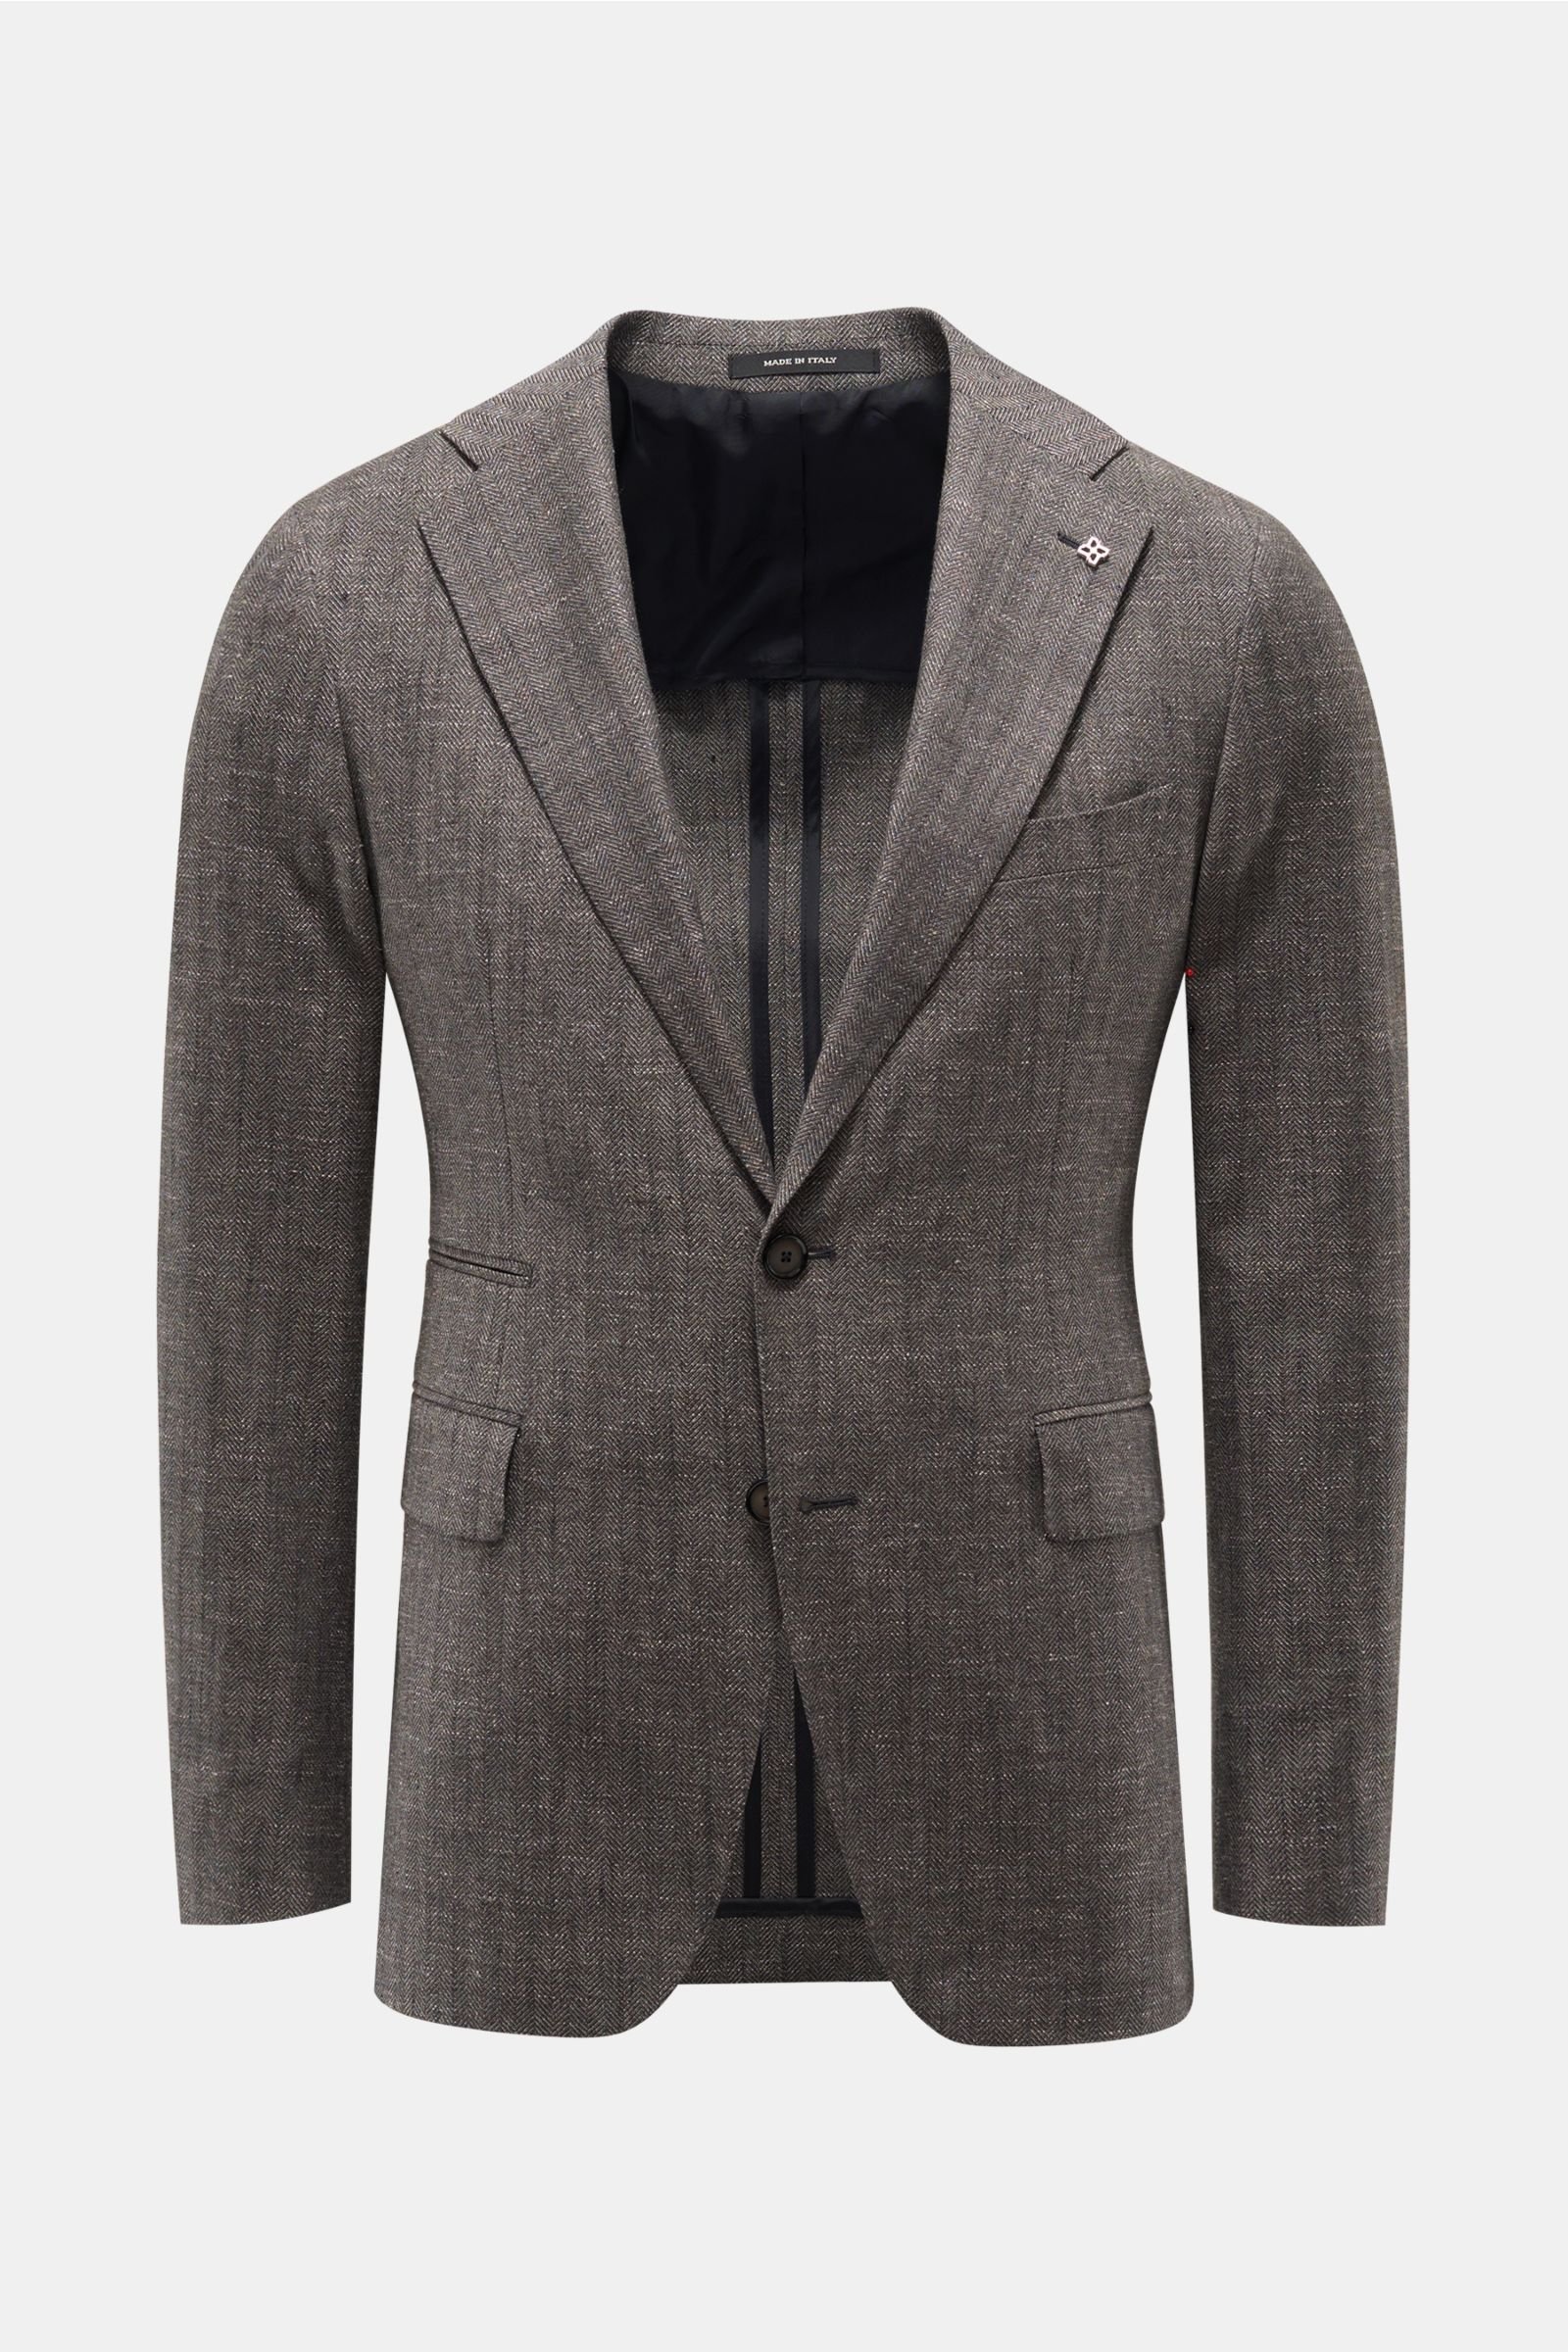 Smart-casual jacket grey-brown patterned